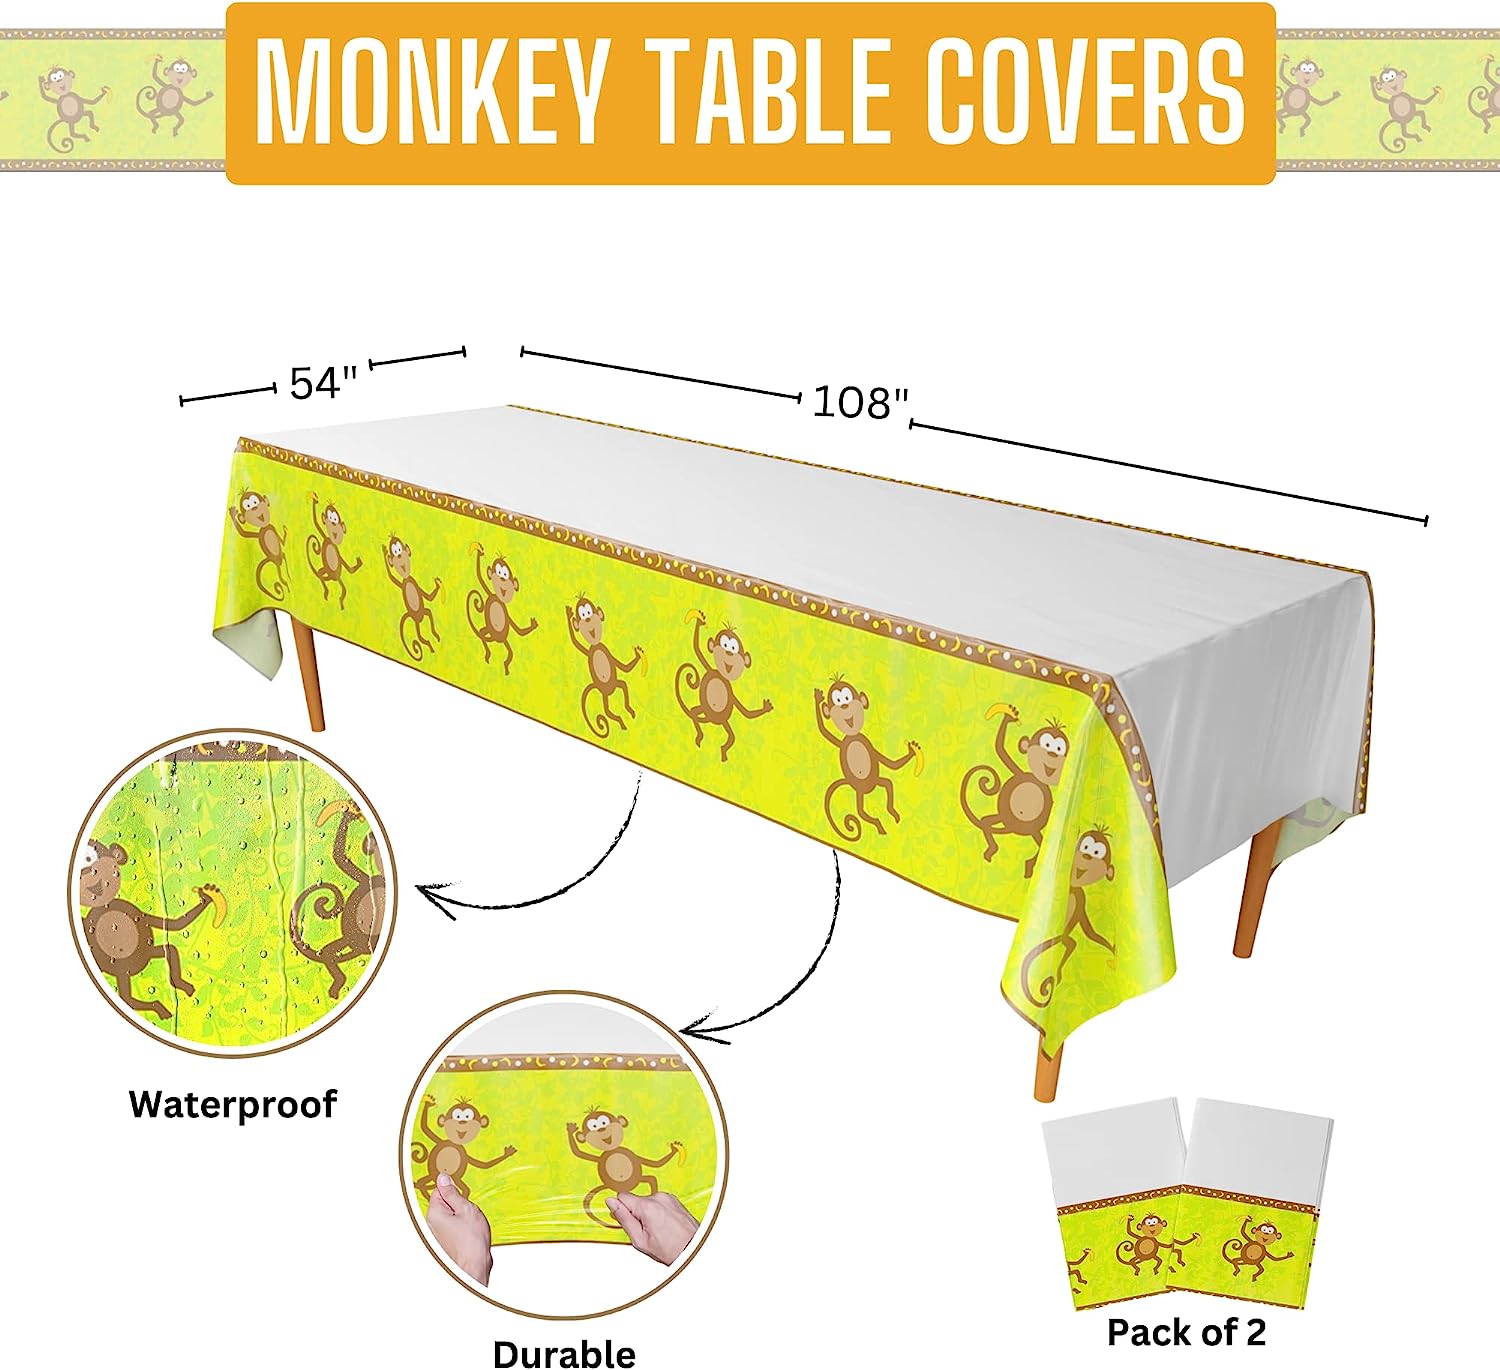 Image of a waterproof and durable Monkey Party Table Covers measuring 54"x108", featuring a cute monkey design. These table covers are perfect for monkey-themed parties, jungle baby showers, or any other festive occasion. The covers are displayed on a plain background.